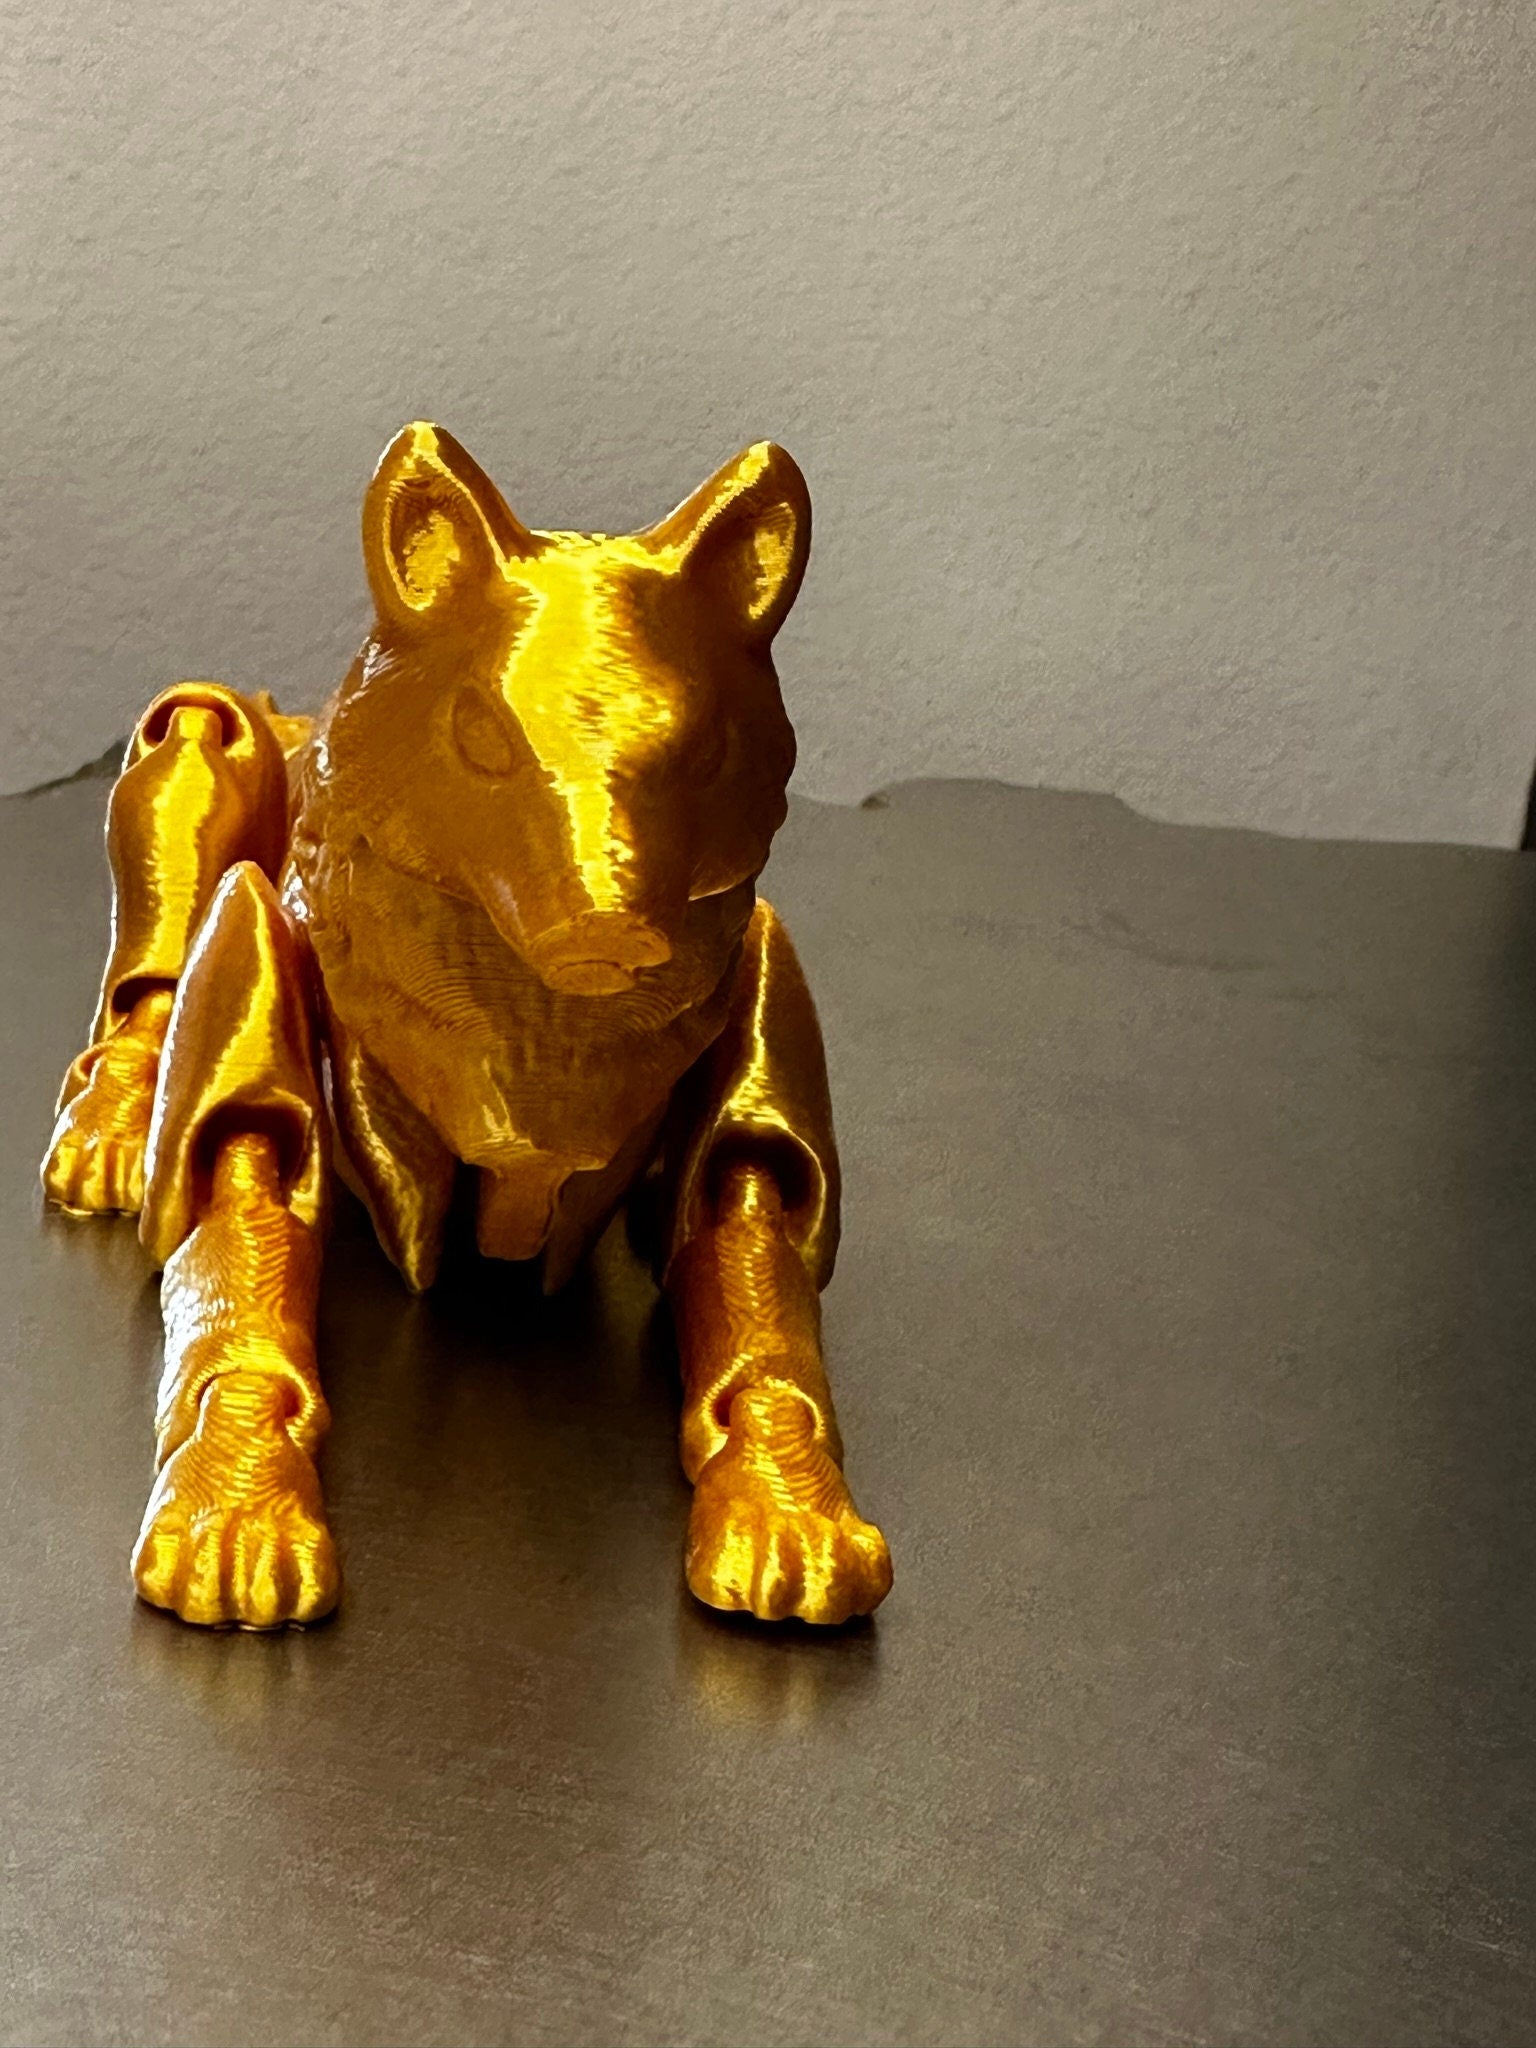 Articulated 3D Printed Giant Wolf Fidget Toy 